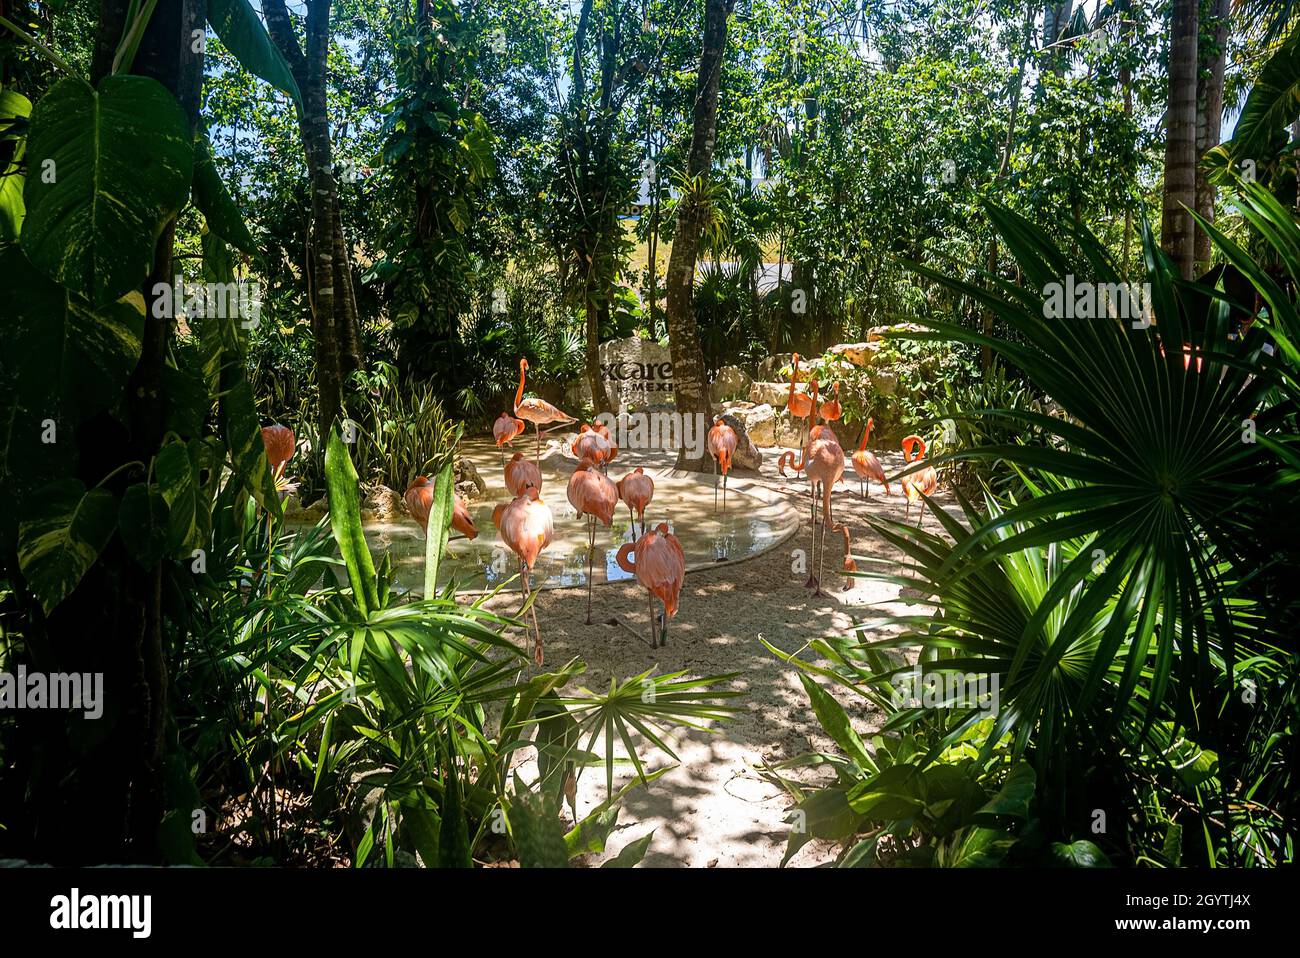 Flock of flamingos in water pond amidst trees at Xcaret eco park Stock Photo